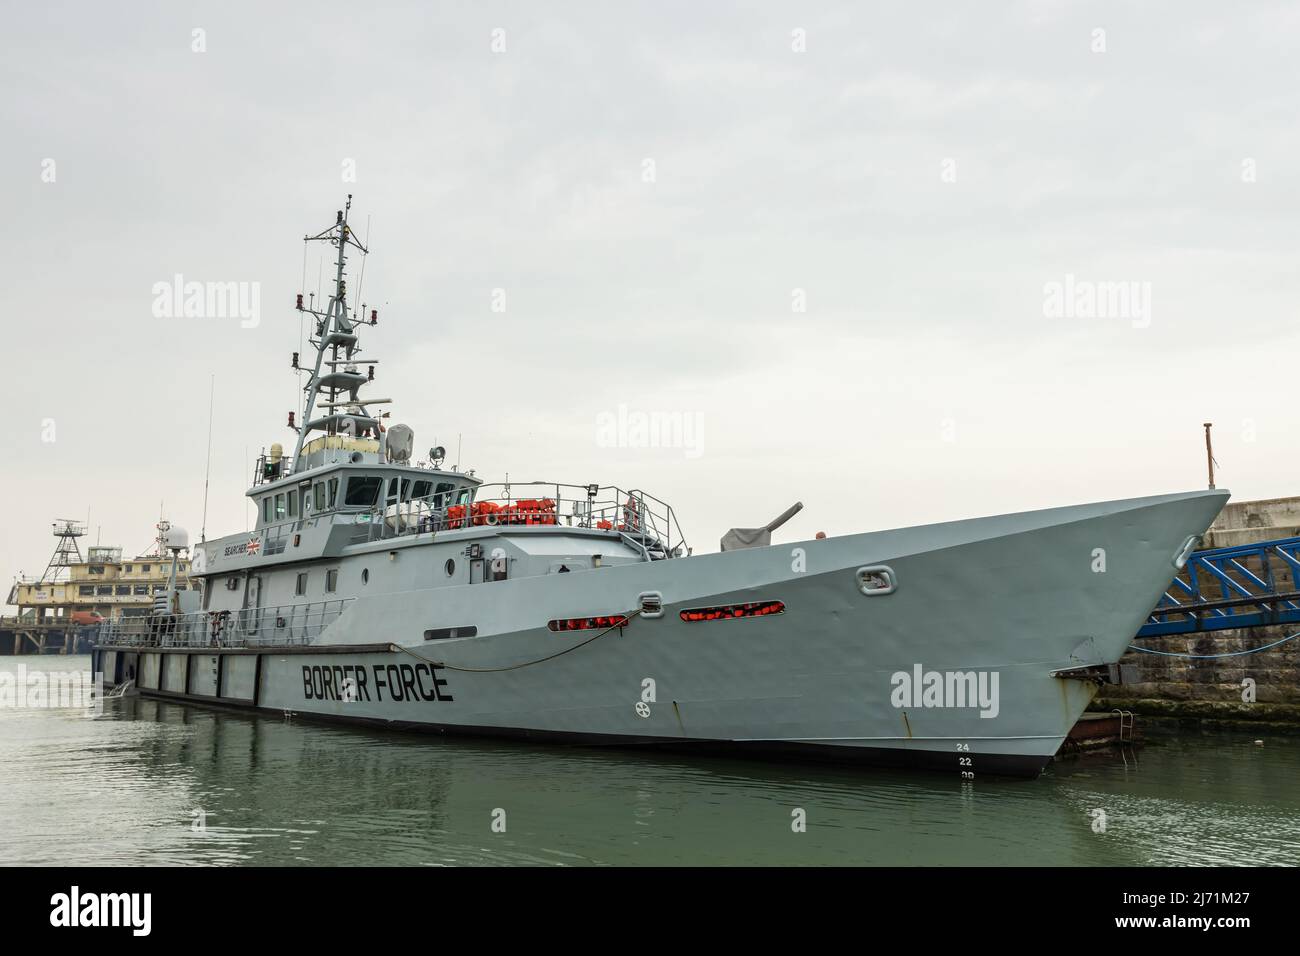 A border force vessel in Ramsgate after returning from assisting migrants near Dover, calm weather days in May 22, red life jackets visible on board Stock Photo